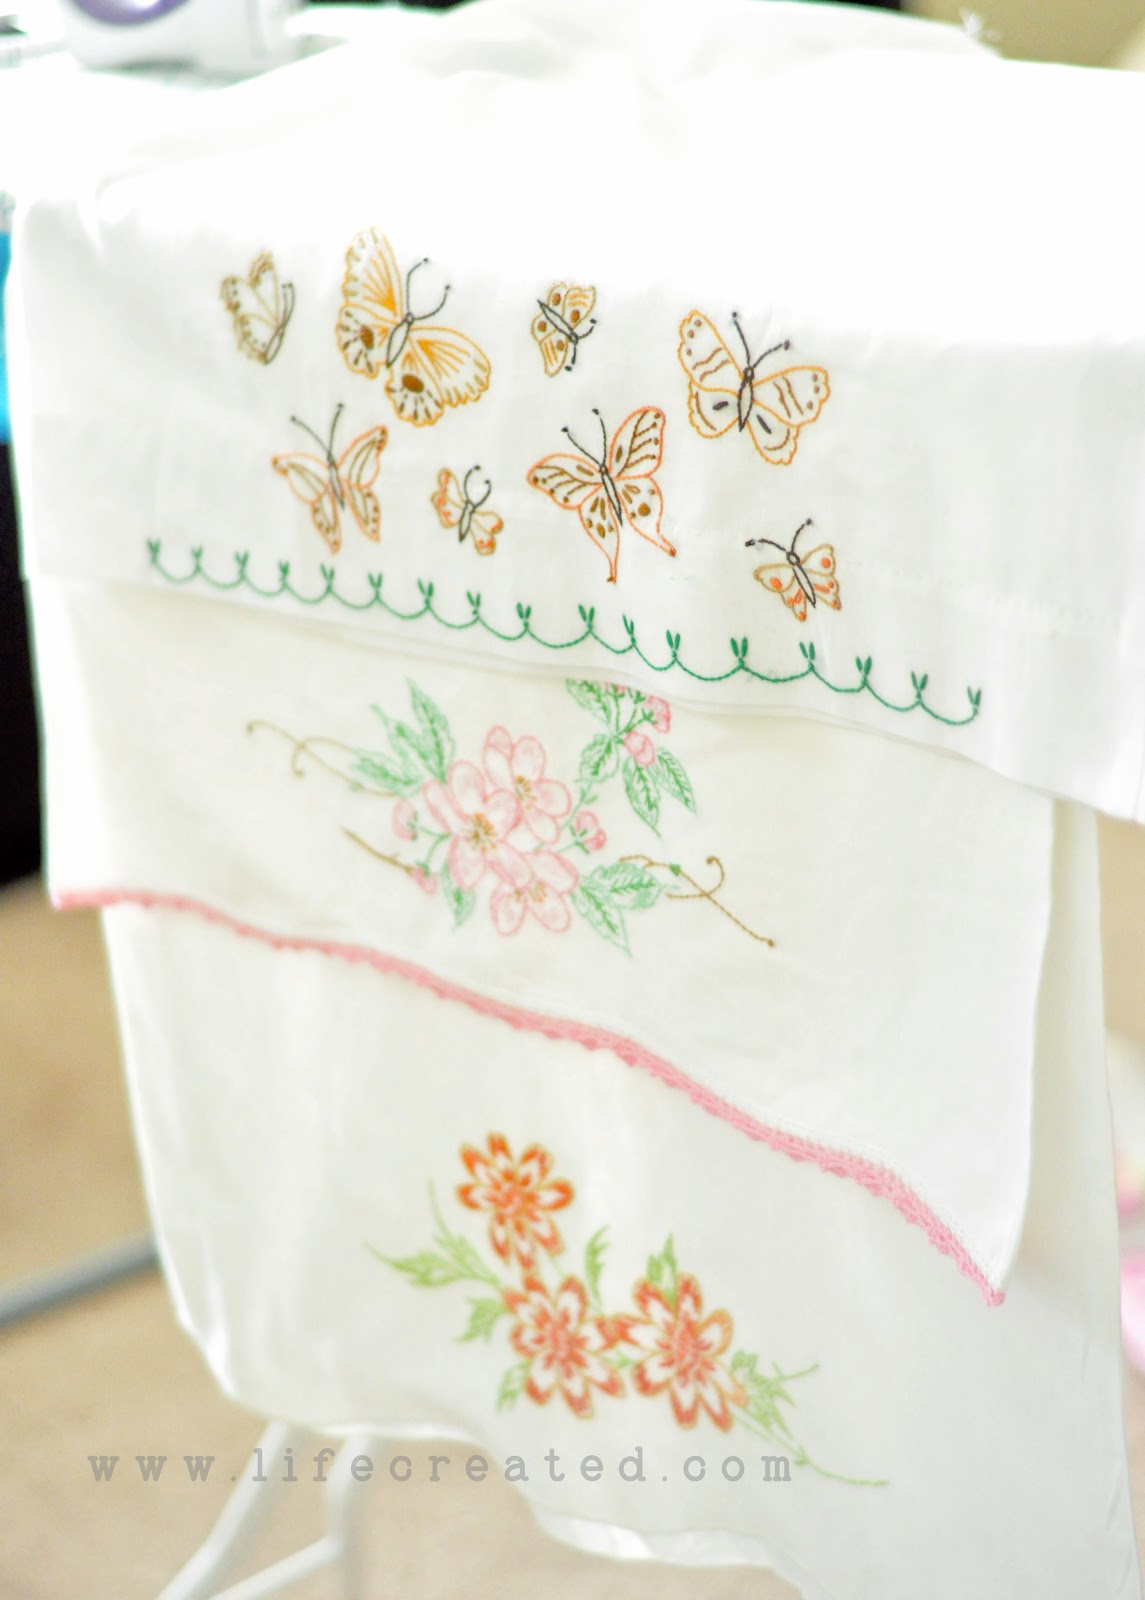 3 cutter pillowcases  Vintage embroideries